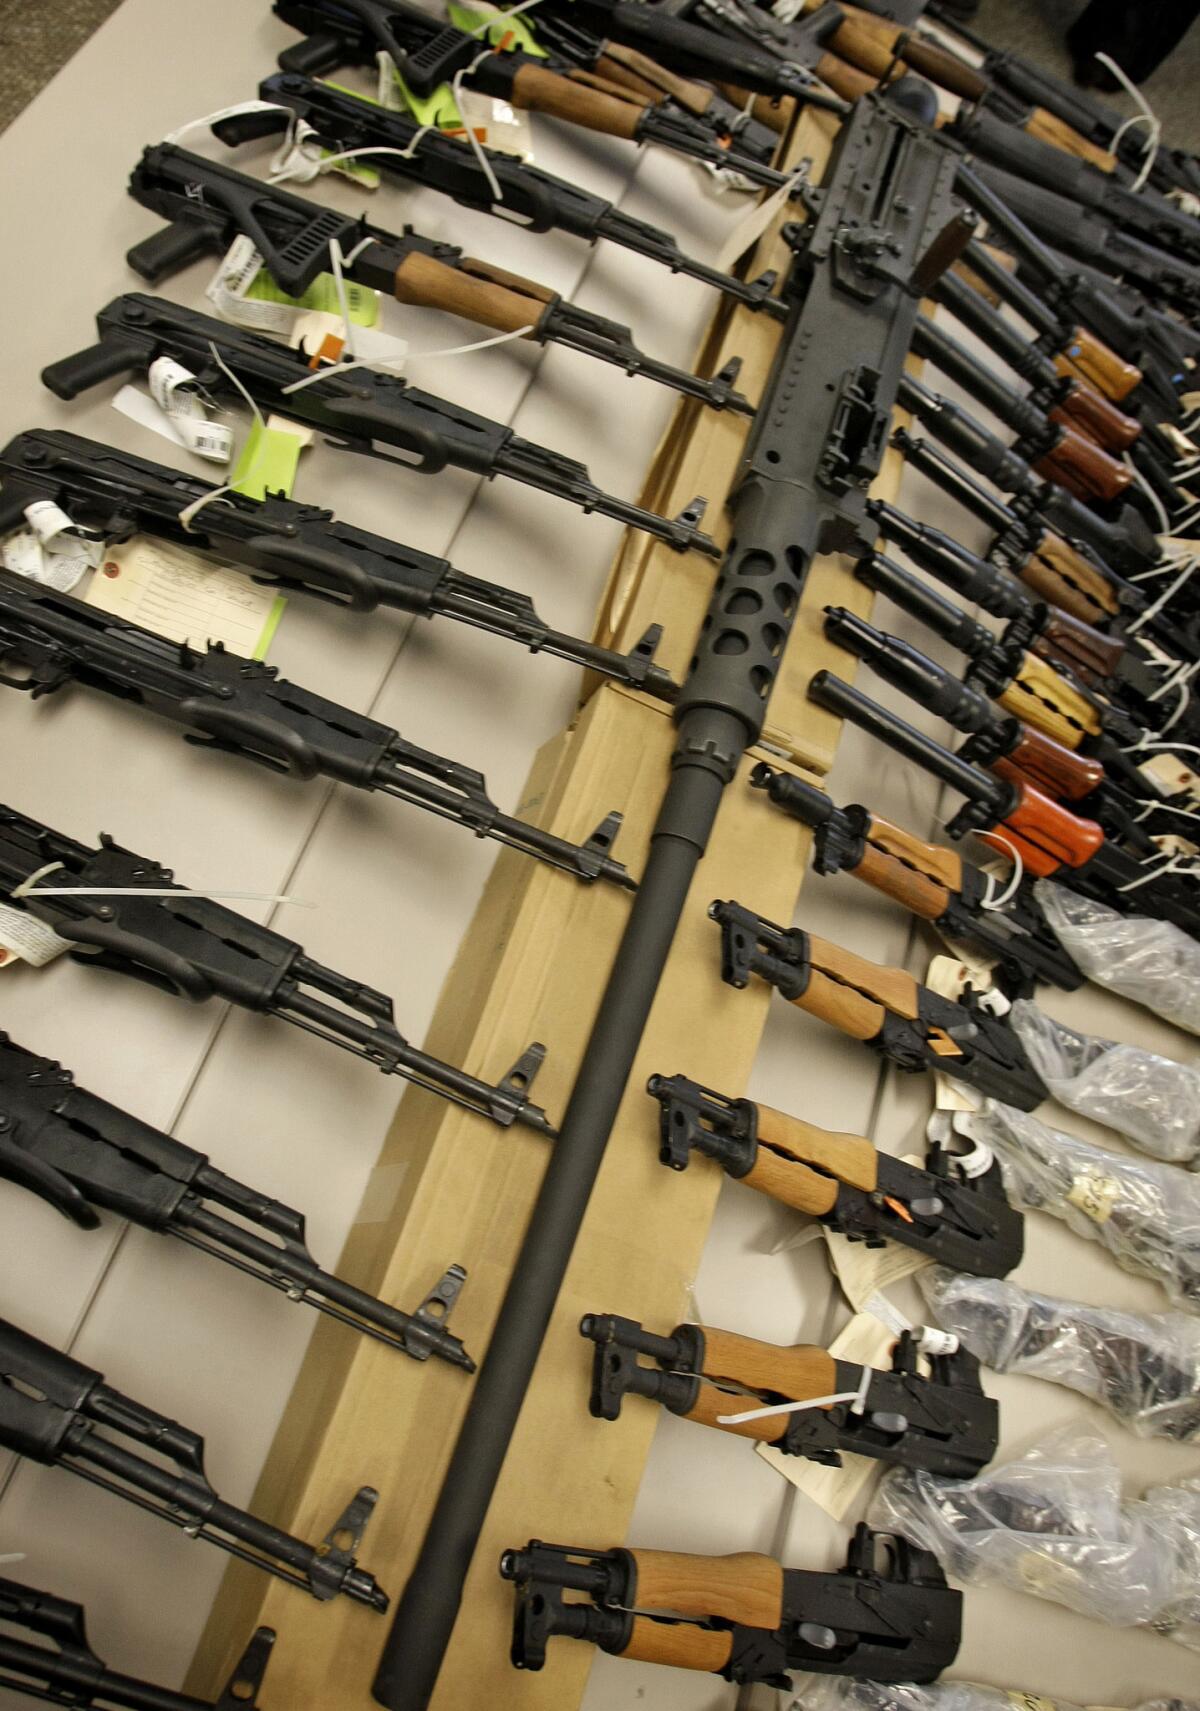 A cache of seized weapons displayed at a news conference in Phoenix.